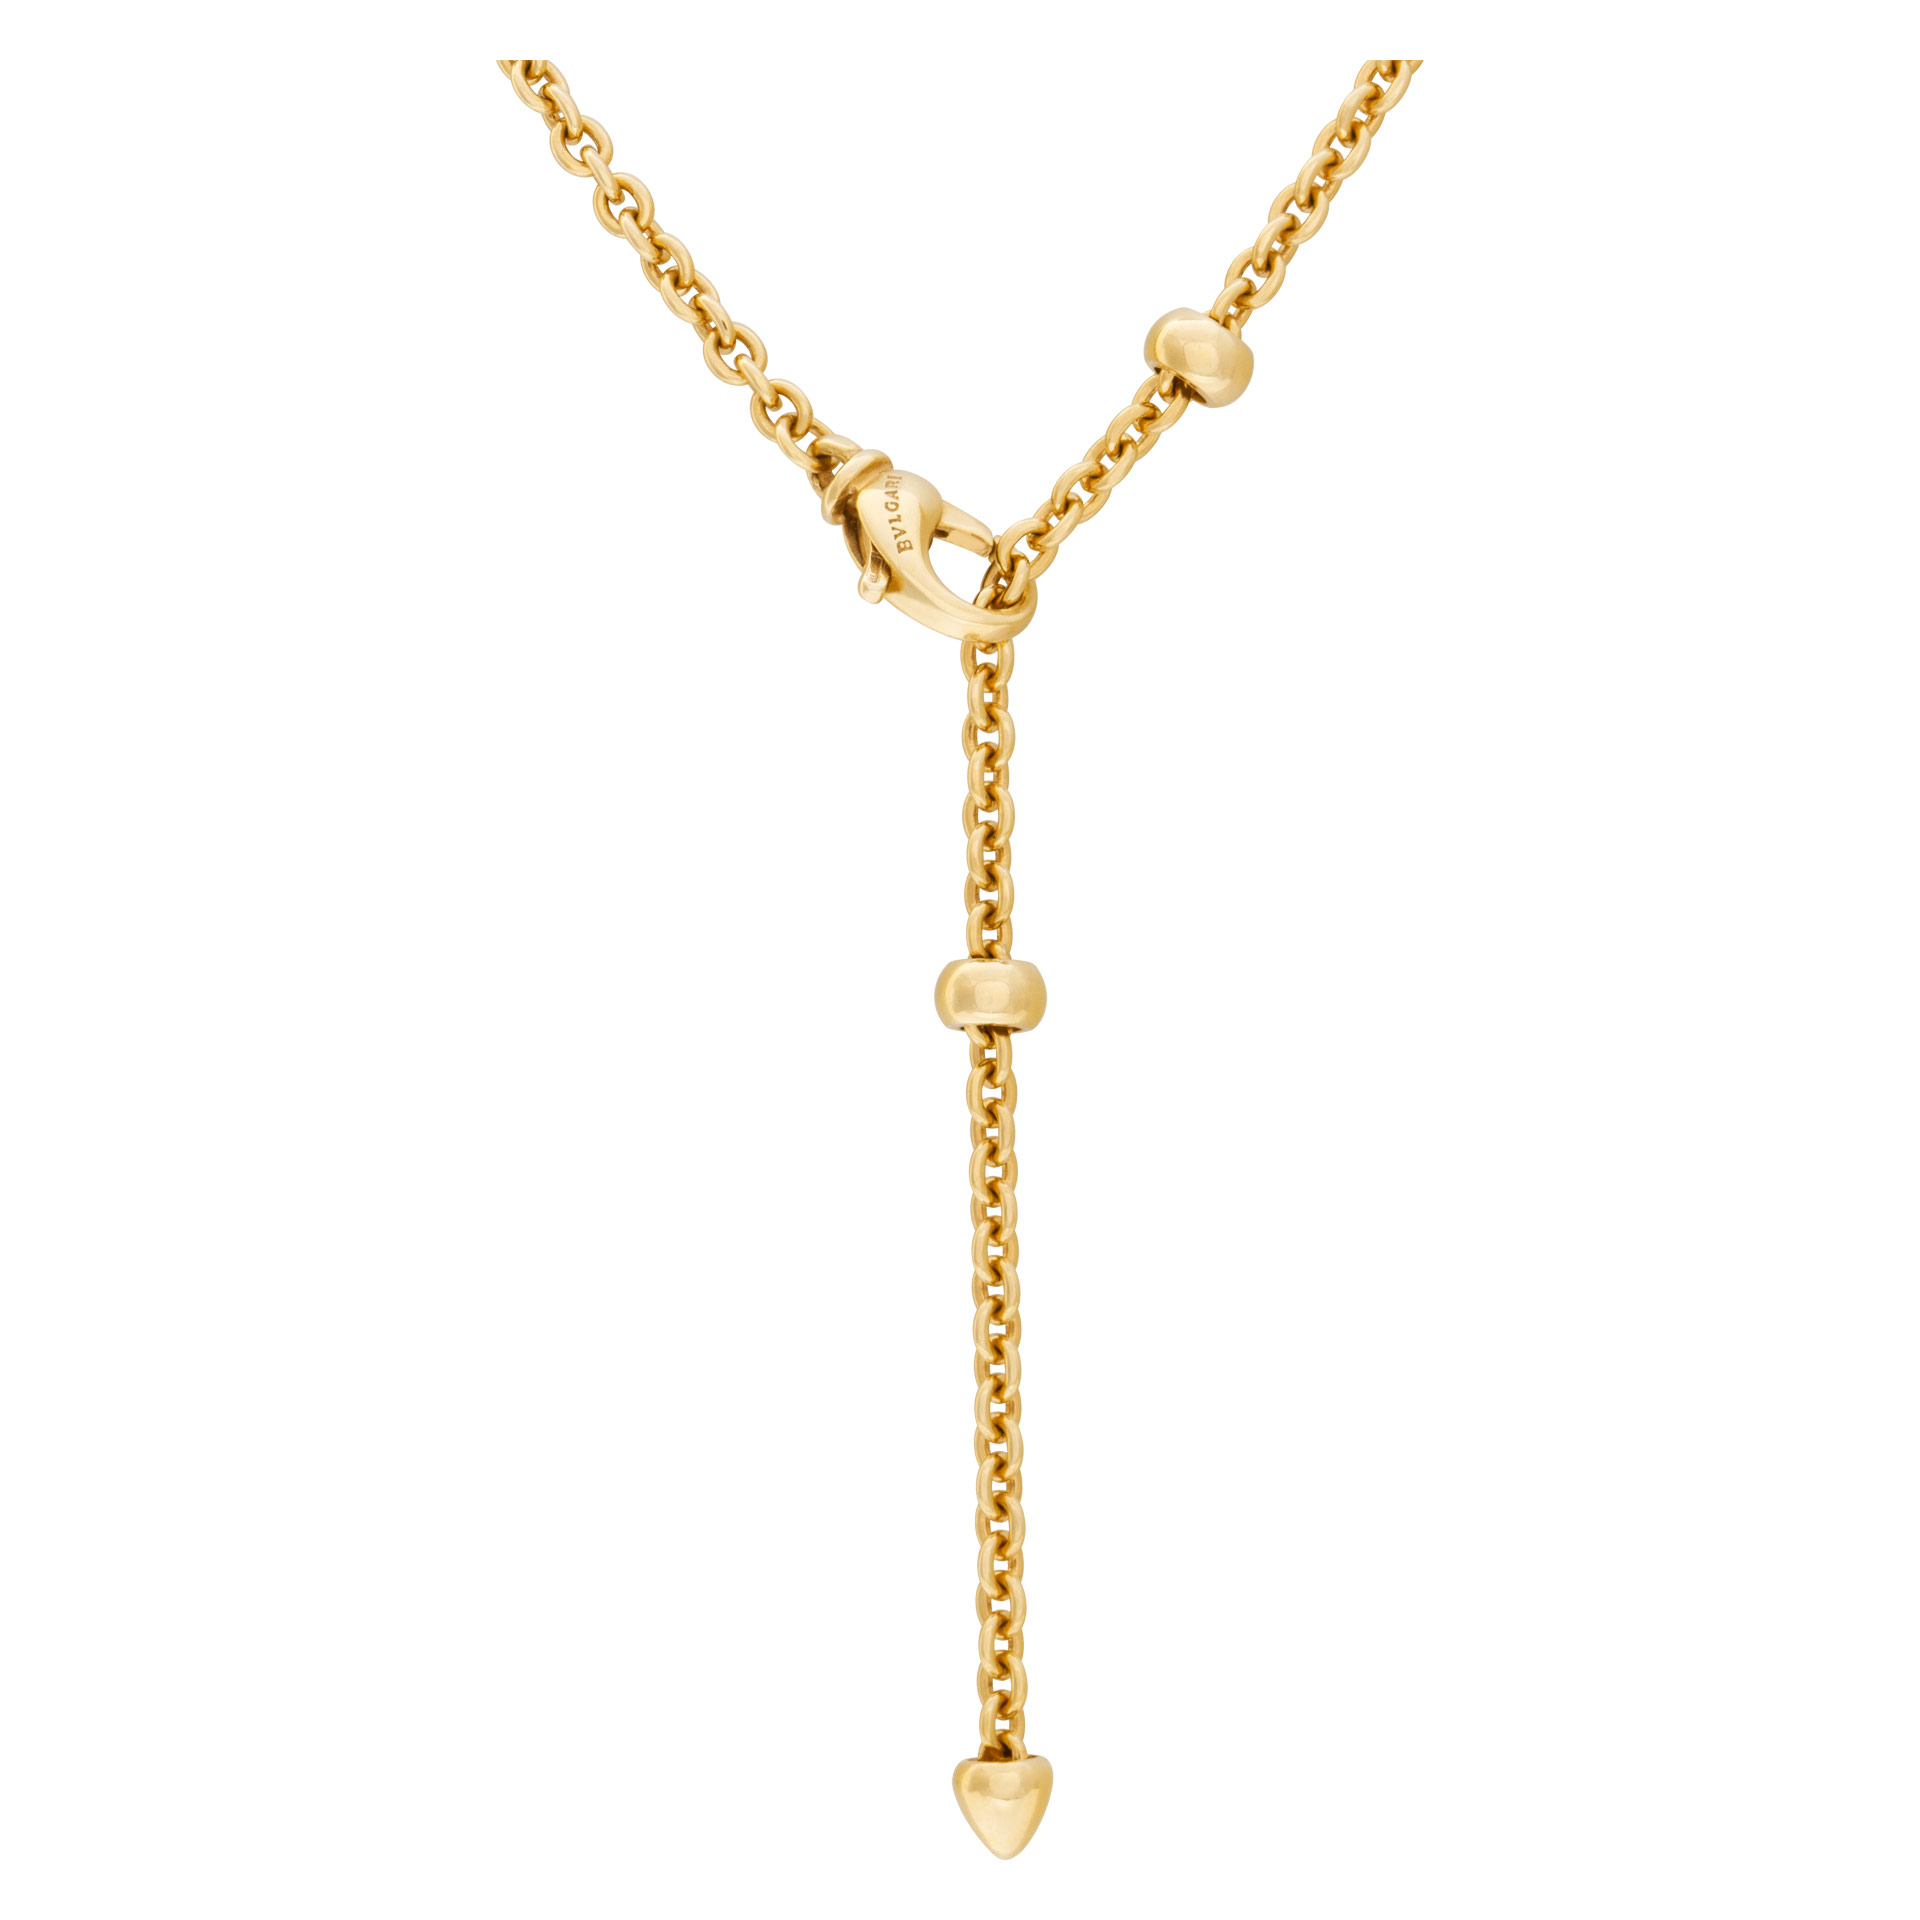 Bvlgari Lariat chain/necklace in 18k yellow gold. Length is 20". Width: 2mm.